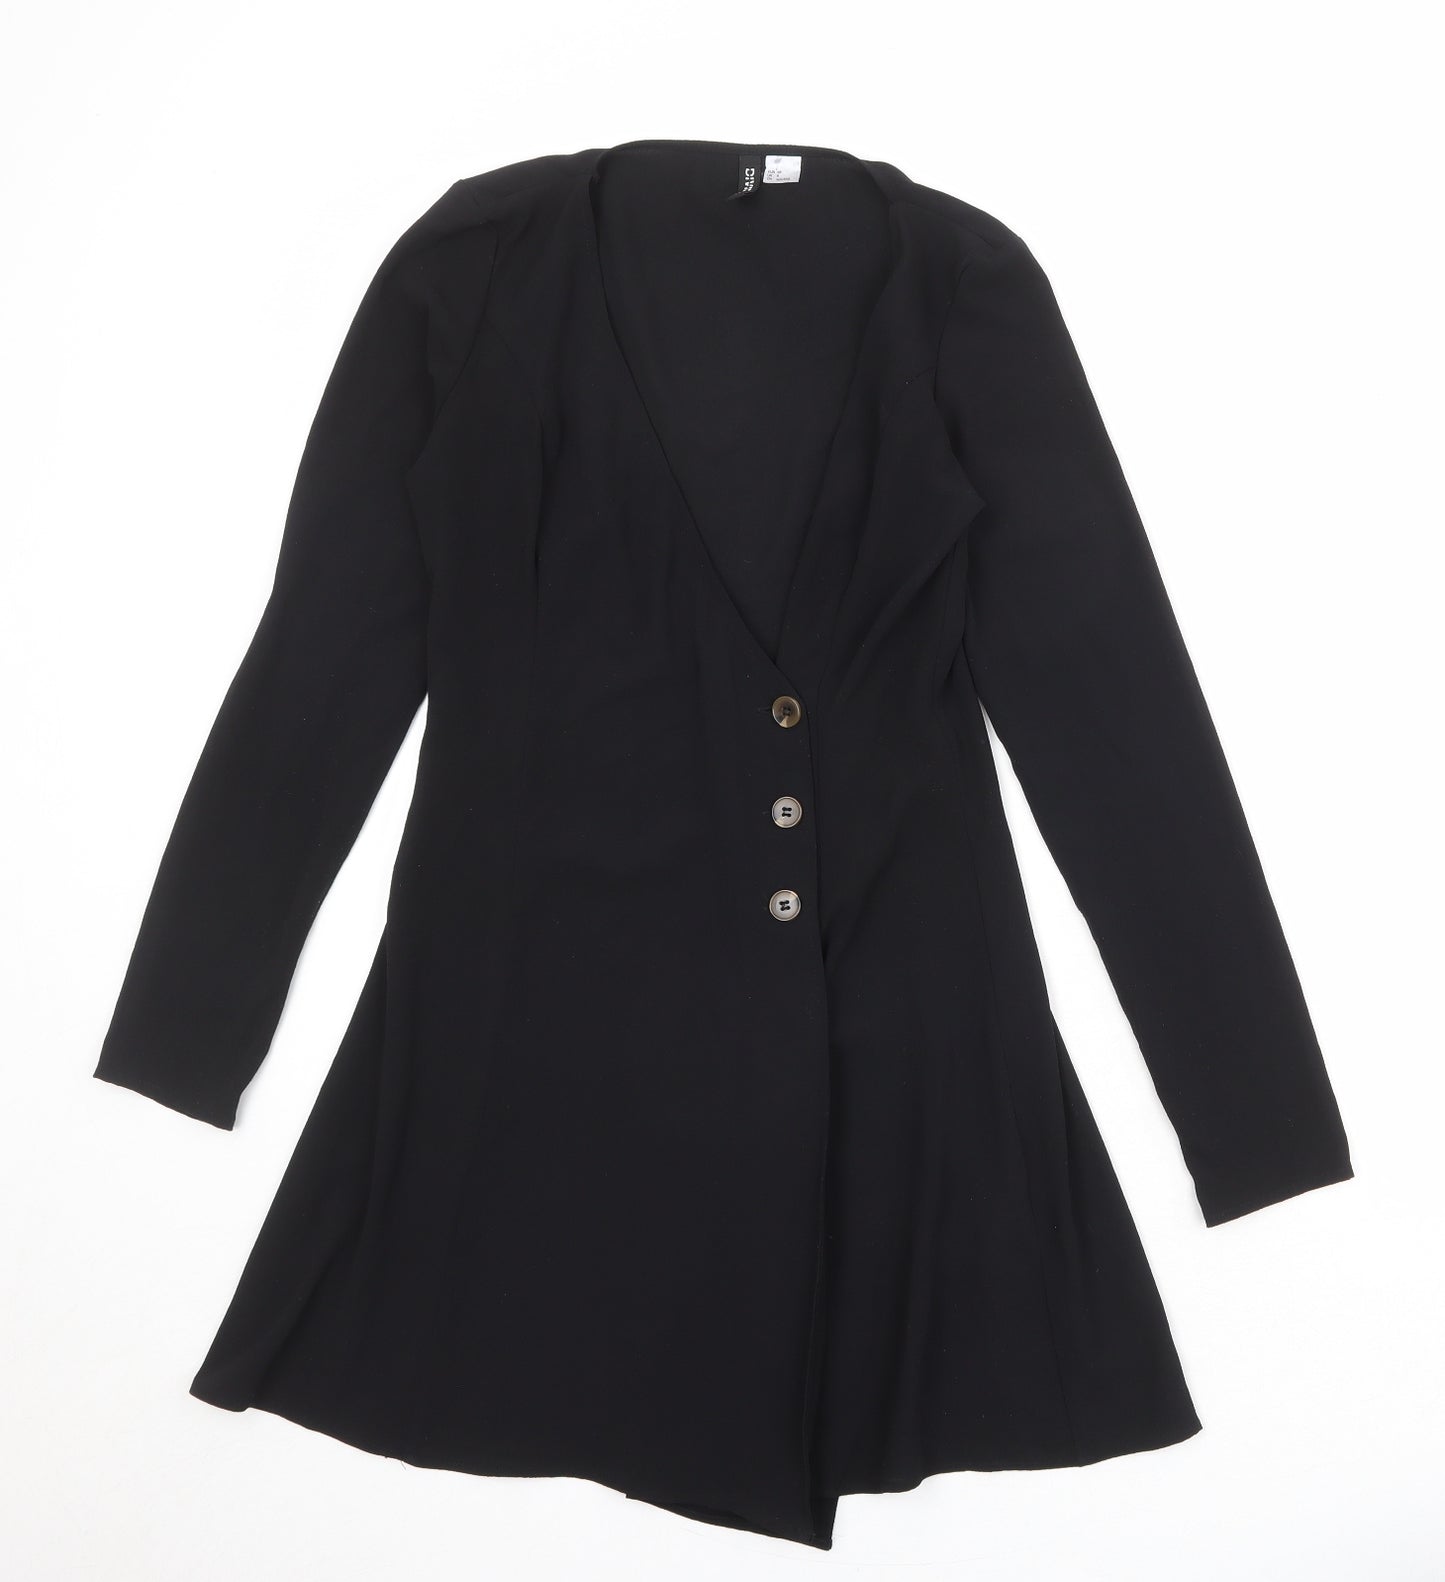 Divided by H&M Womens Black Polyester Jacket Dress Size 8 V-Neck Button